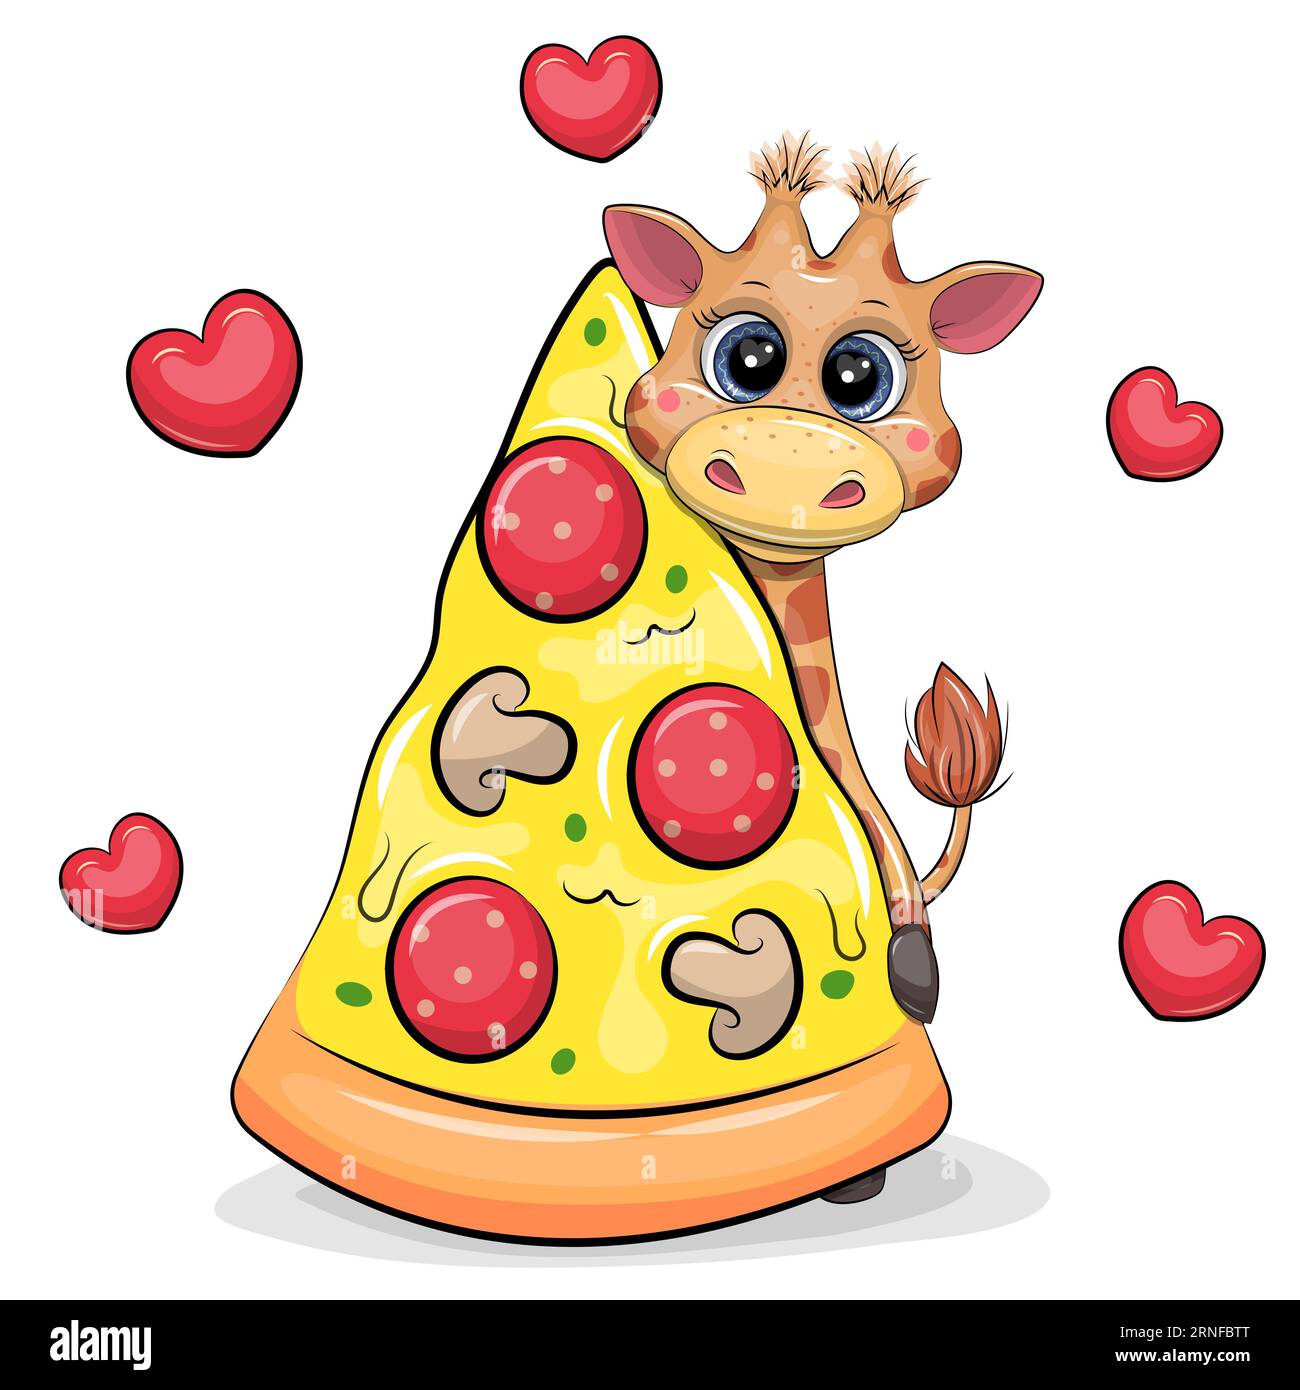 Cute cartoon giraffe with a big piece of pizza. Vector illustration of animal on a white background with red hearts. Stock Vector